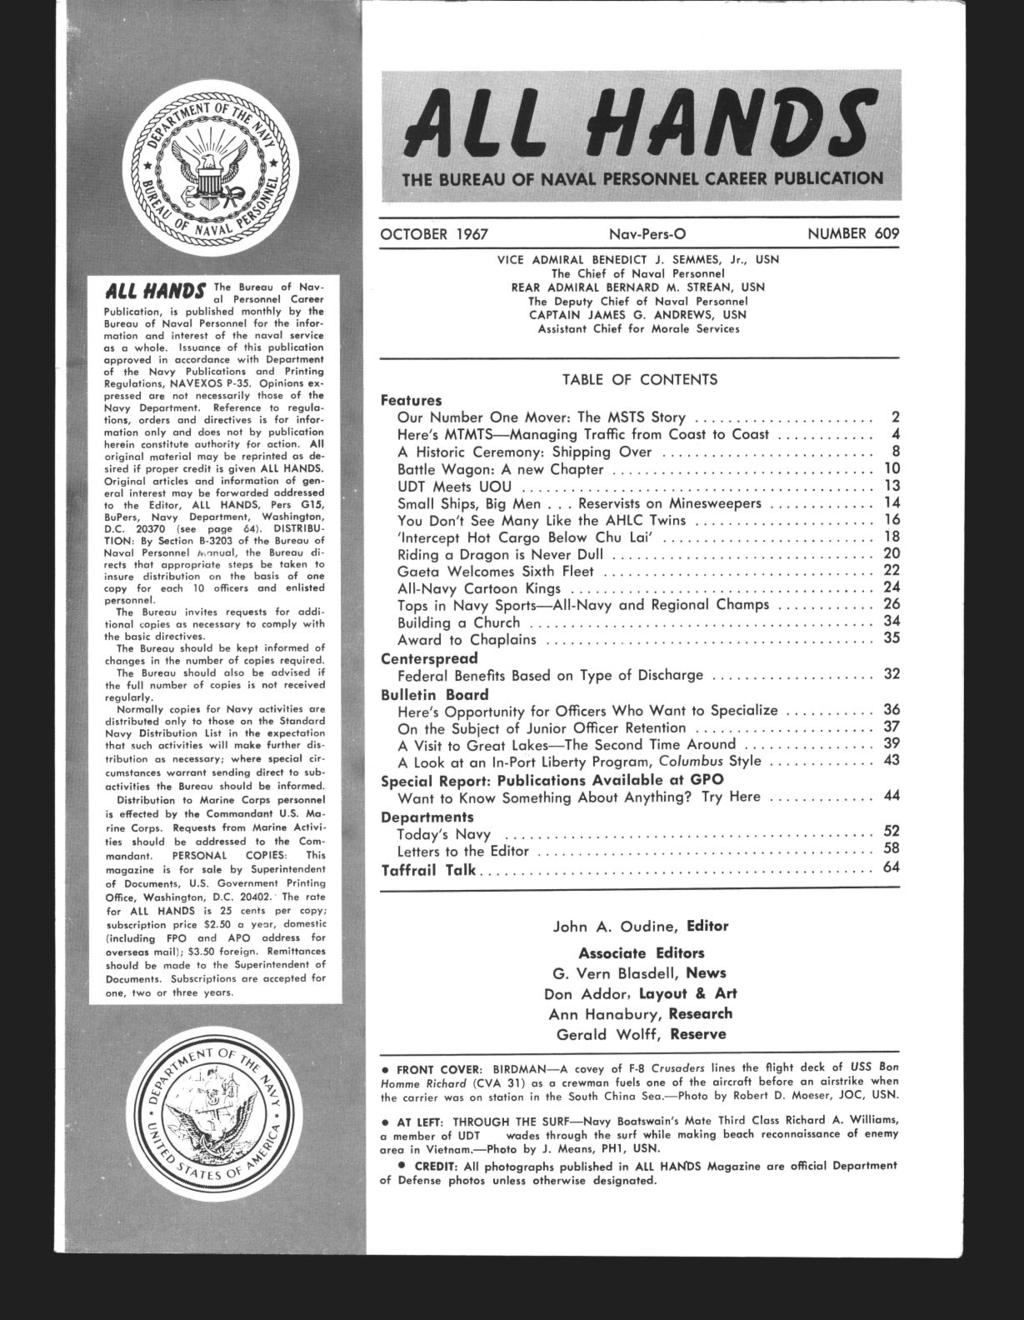 OCTOBER 1967 Nav-Pers-0 NUMBER 609 The Bureau of Nov- All 'AN'S oi Personnel Career Publication, is published monthly by the Bureau of Naval Personnel for the informotion and interest of the novo1